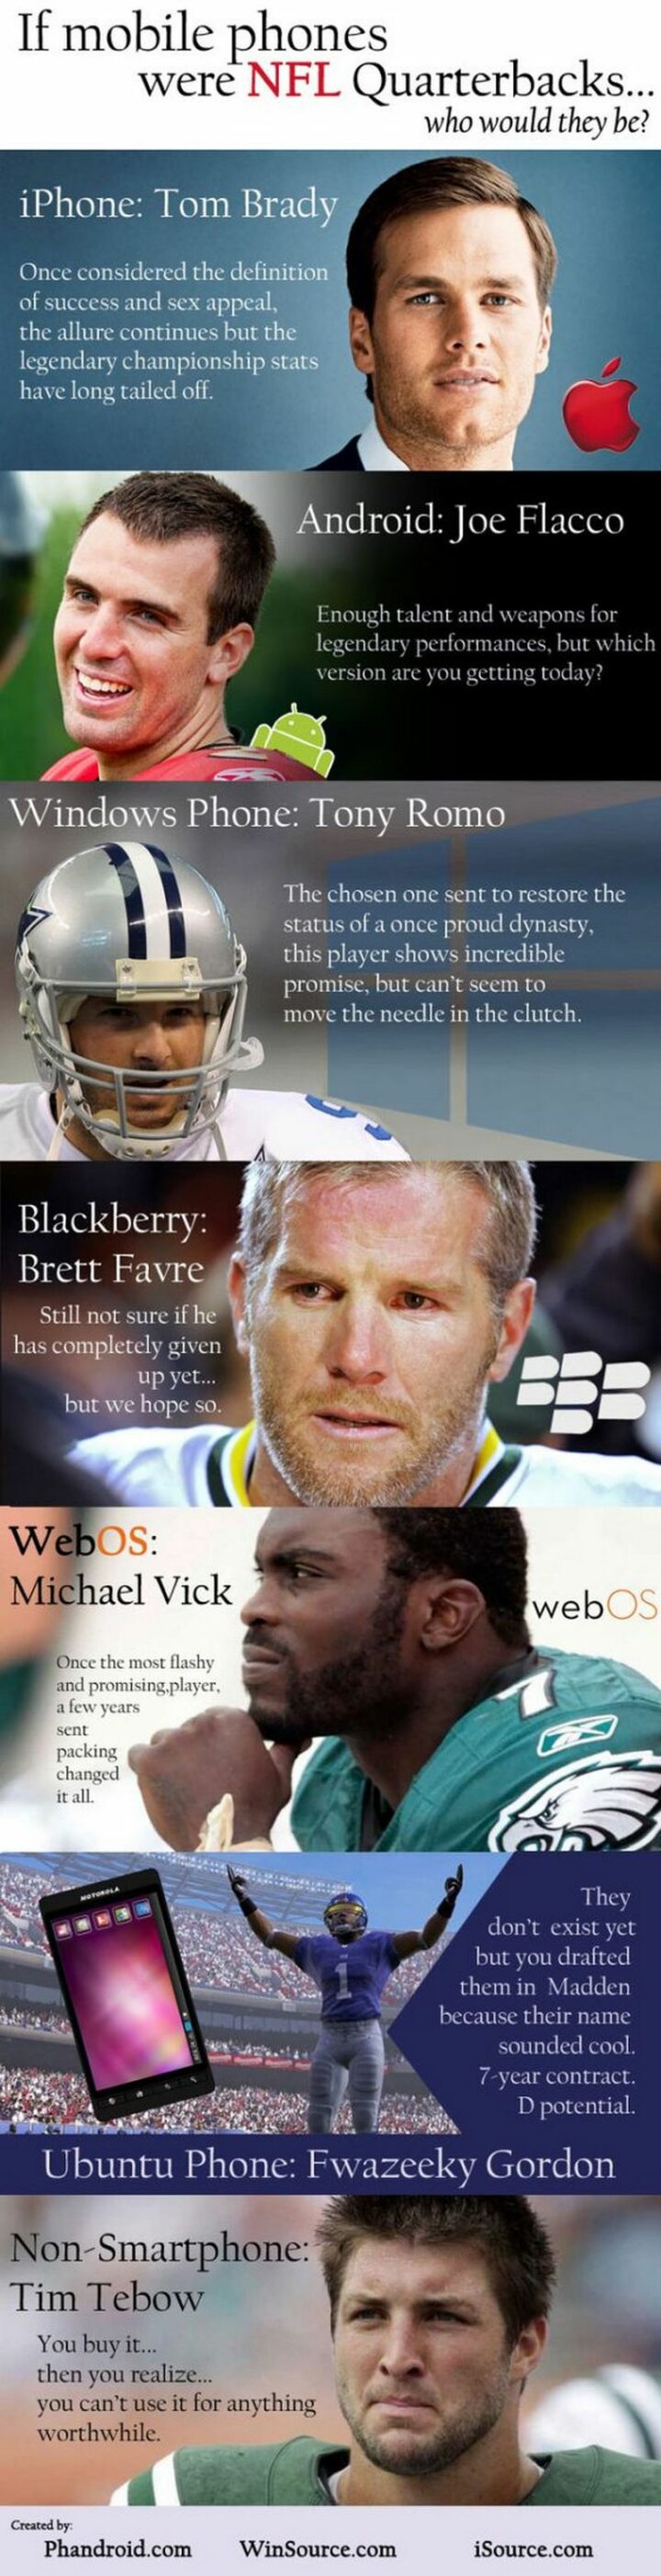 "If mobile phones were NFL quarterbacks...Who would they be?"